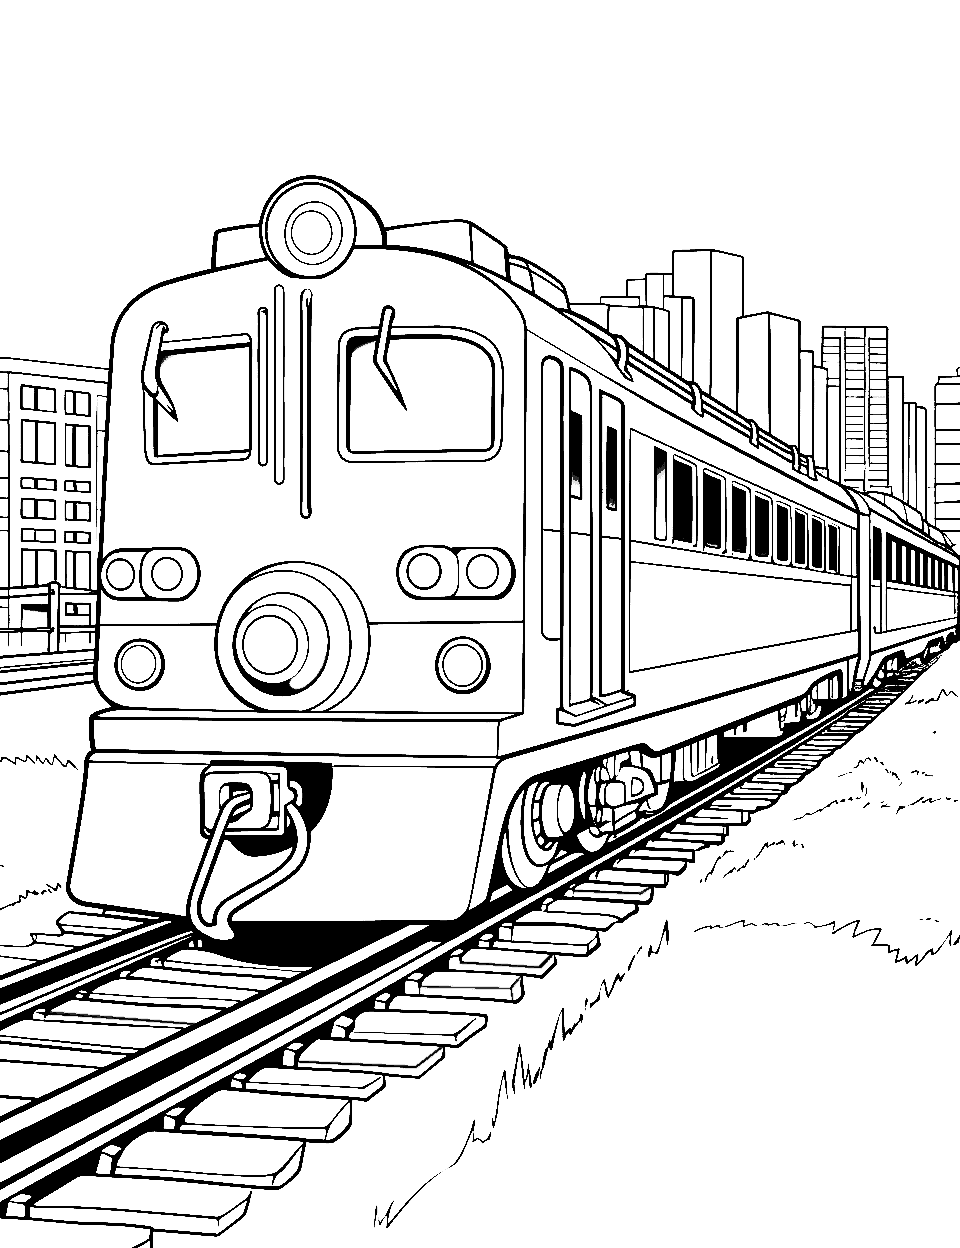 Transport Through the City Coloring Page - A modern city train moving between skyscrapers.